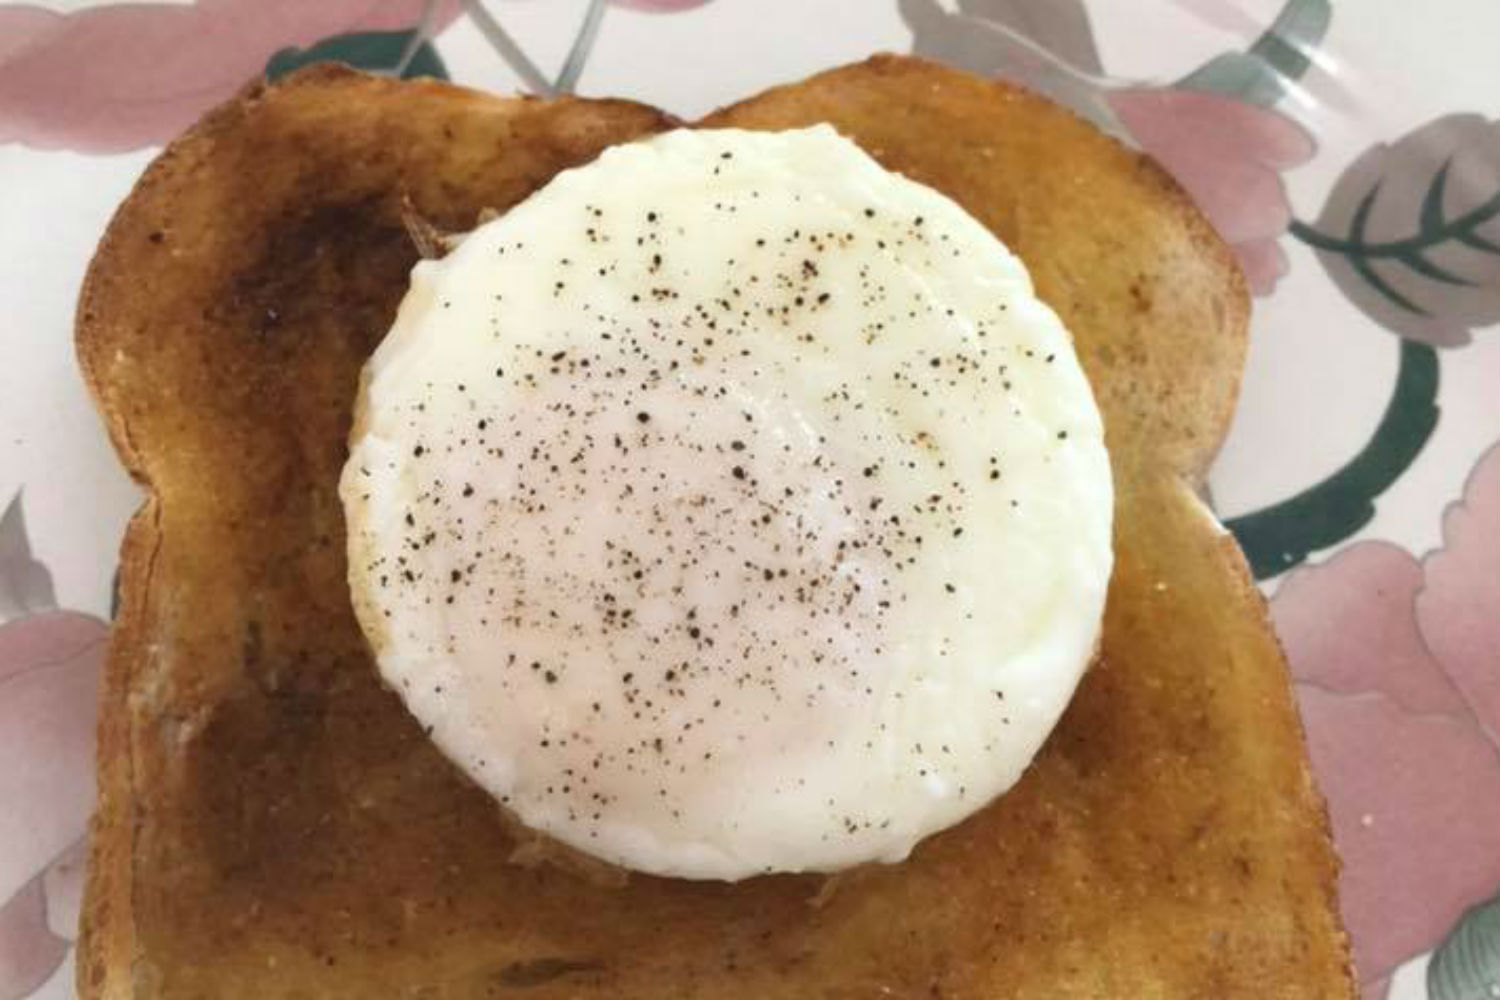 Kmart Pie Makers say they’ve mastered the PERFECT poached egg – using the $29 gadget!